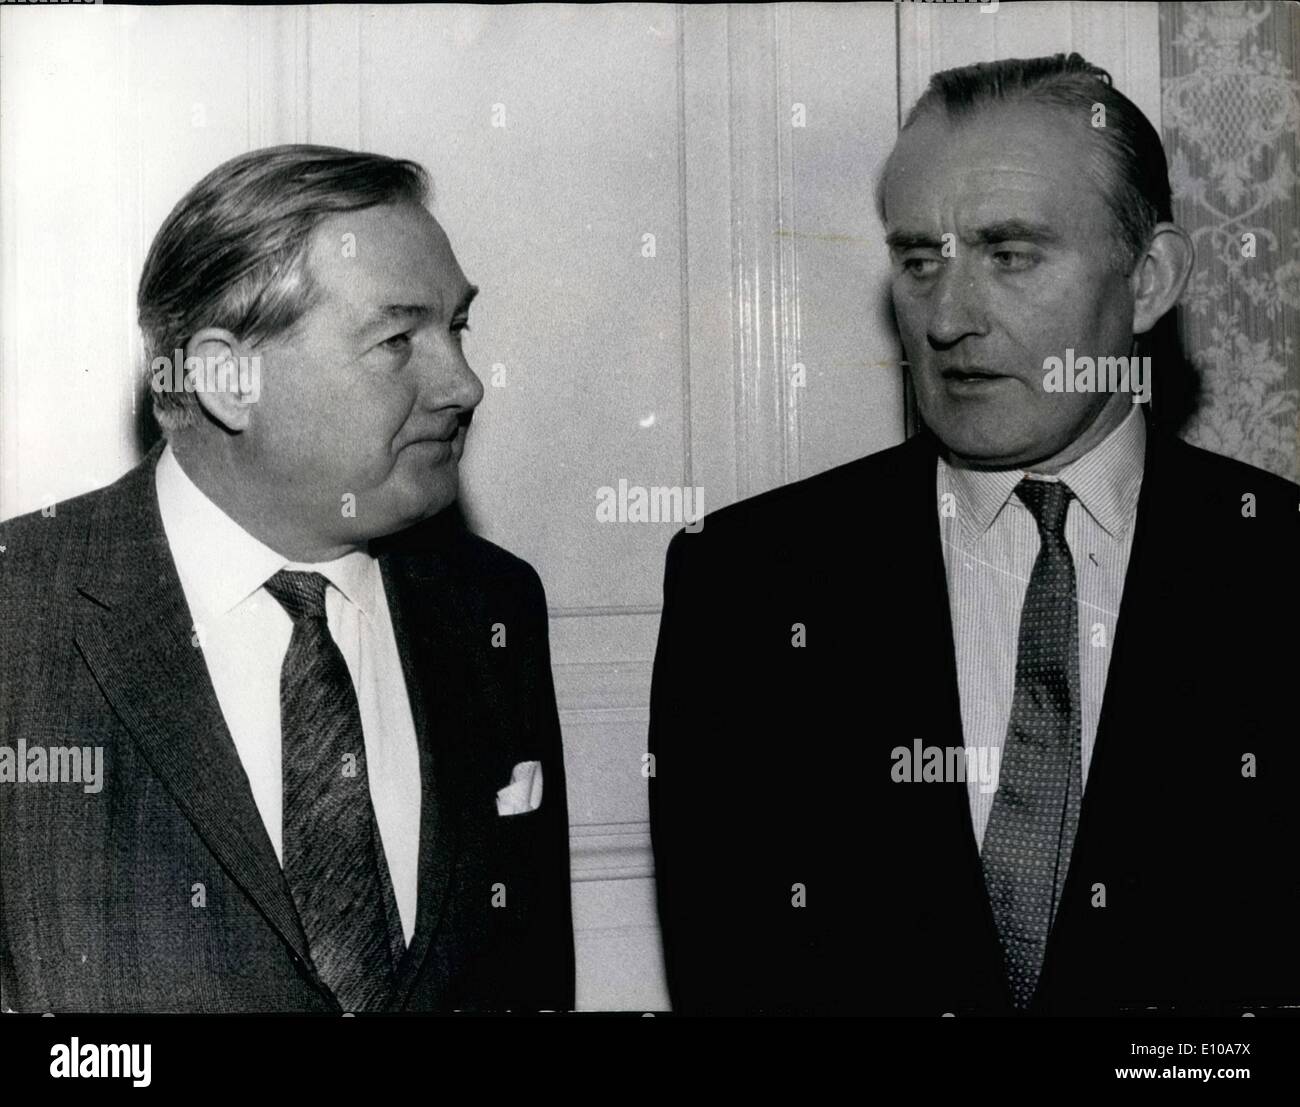 Apr. 04, 1970 - Ulster prime minister meets Britain's home secretary in London. Major Chichester - clard, Northern Ireland prime minster yesterday paid a visit to the home office in London where he met Mr. Callaghan , the British home secretary ,for talks on the situation in Ulster, including the role of the security forces and economics and employment problems. photo shows Major Chichi-ester Clark (left) pictured with Mr. Callaghan at the home office yesterday. Stock Photo